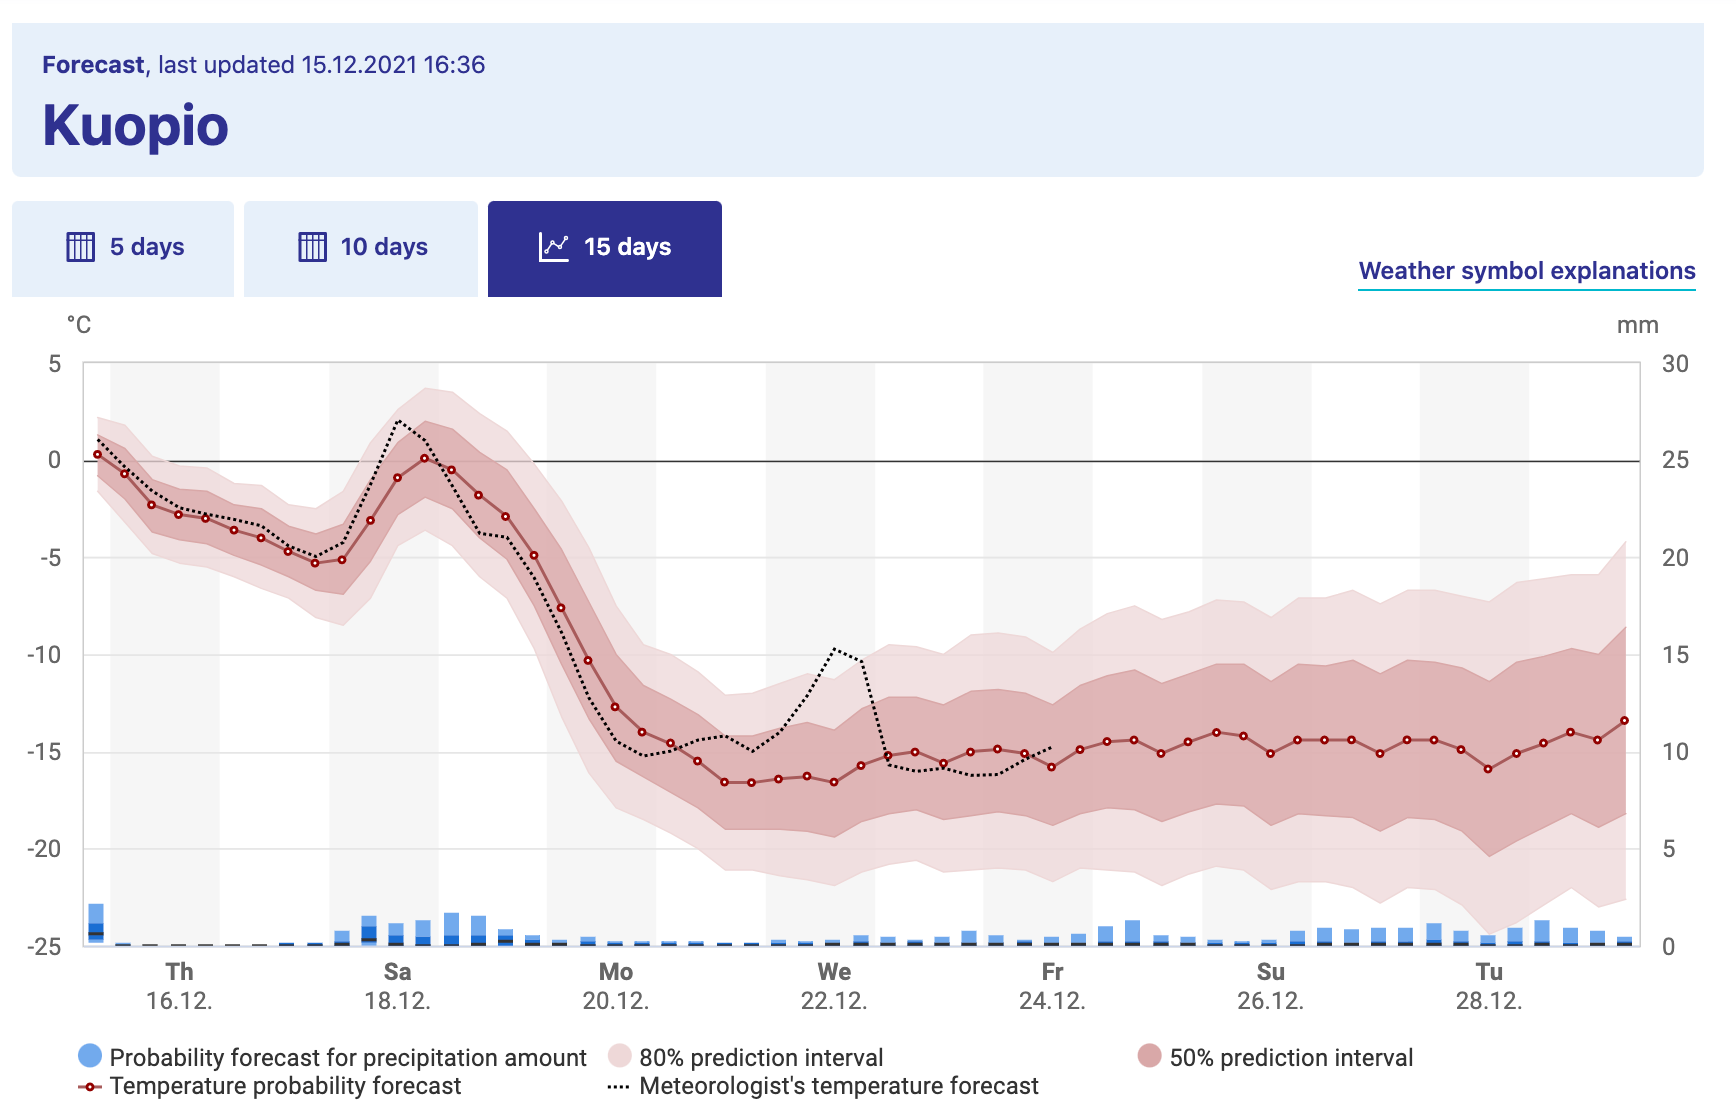 Long term weather forecast for Kuopio, a city in Finland, from the Finnish Weather Institute. Accessed 16-Dec 2021.